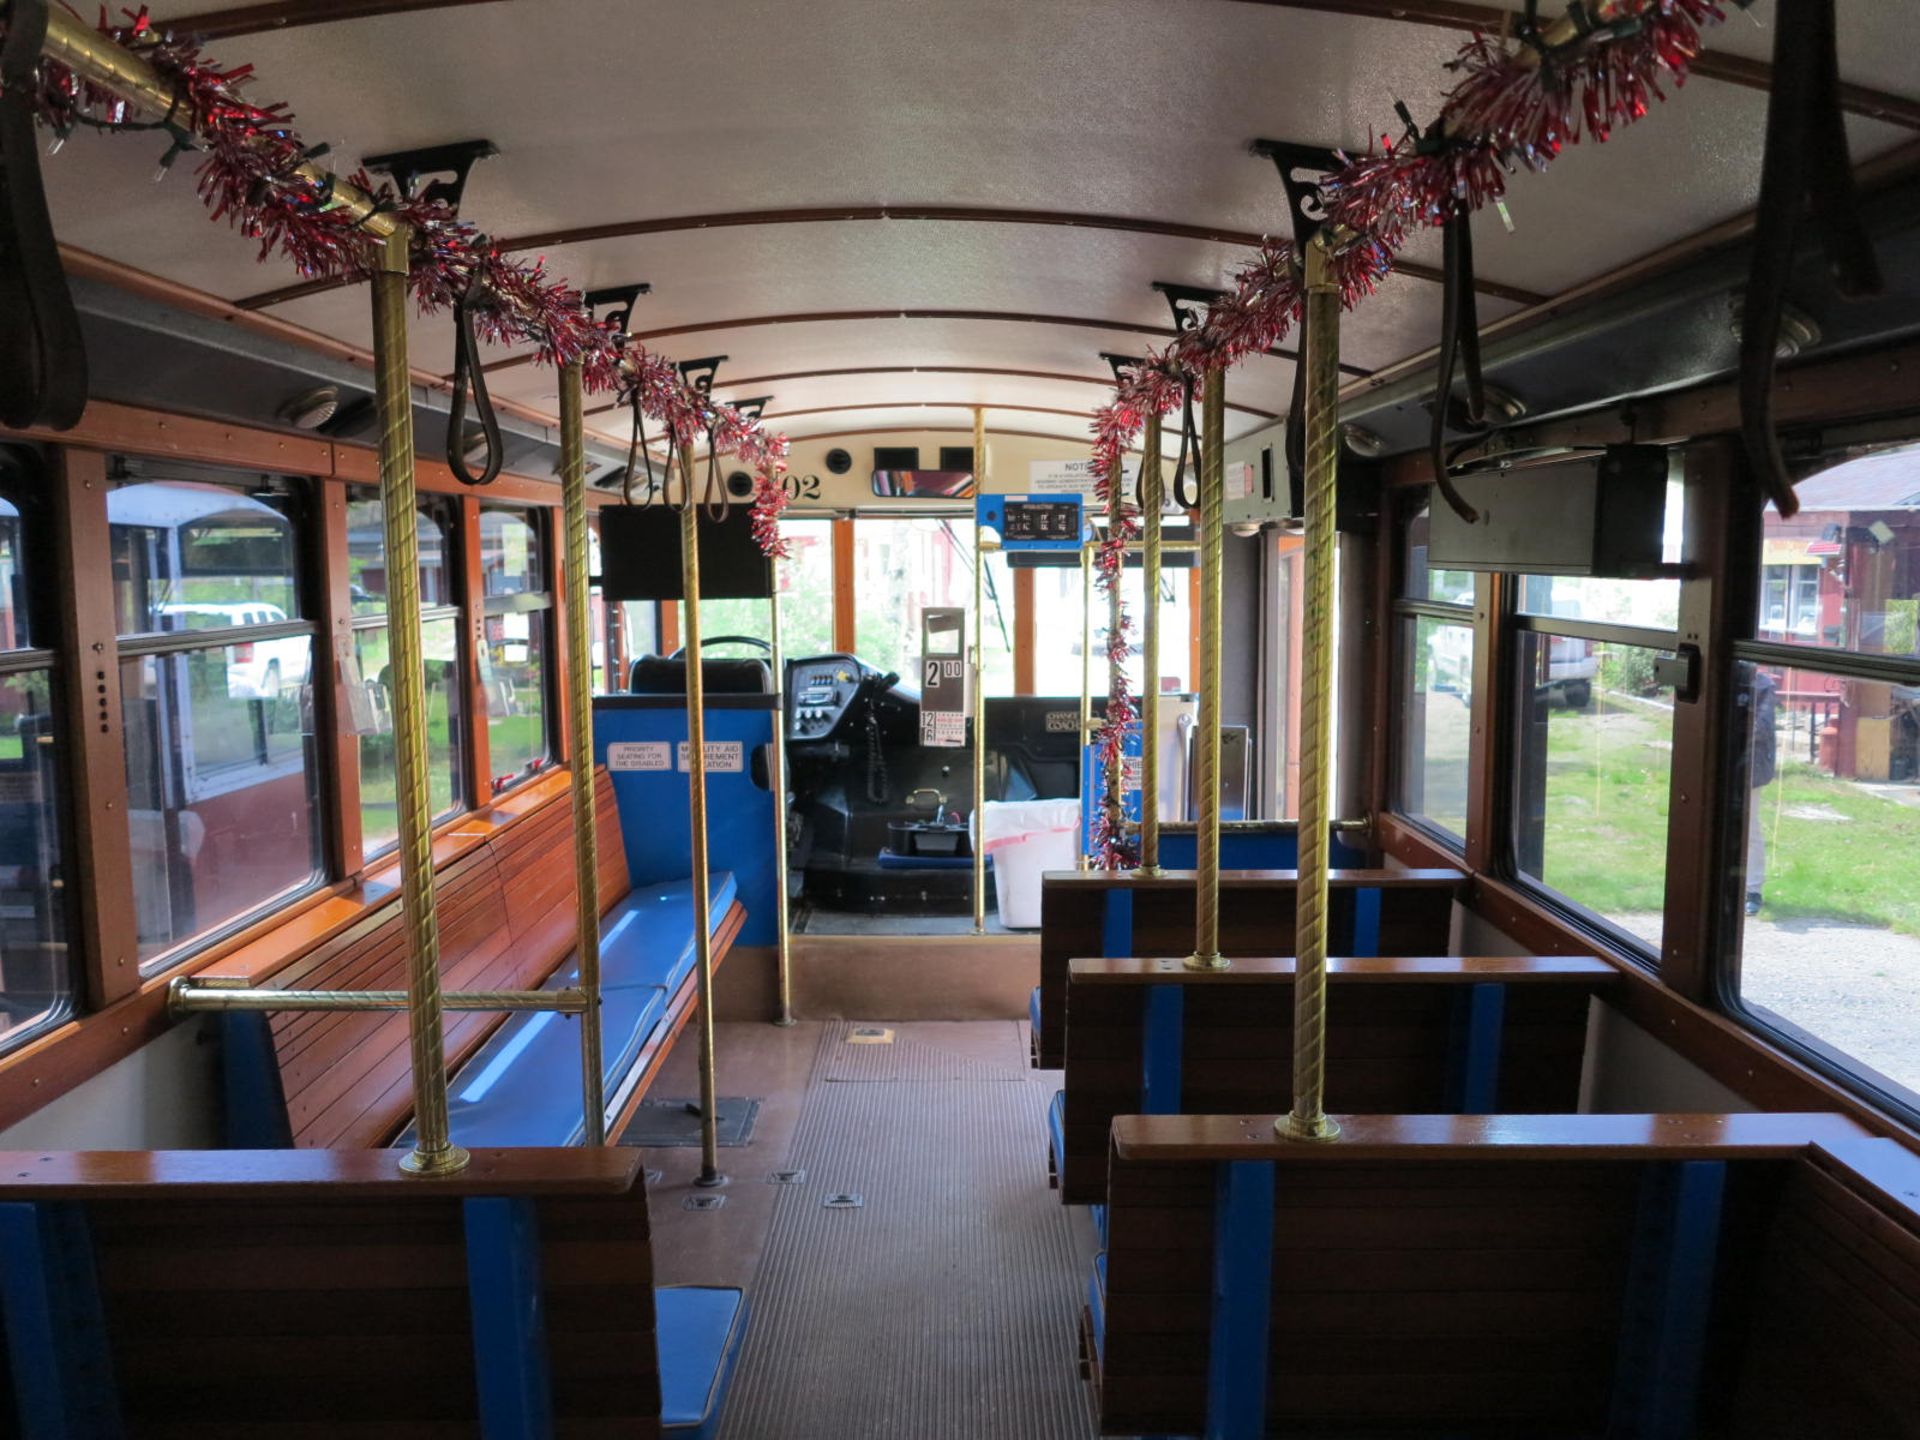 2002 Chance Trolley - Image 6 of 7